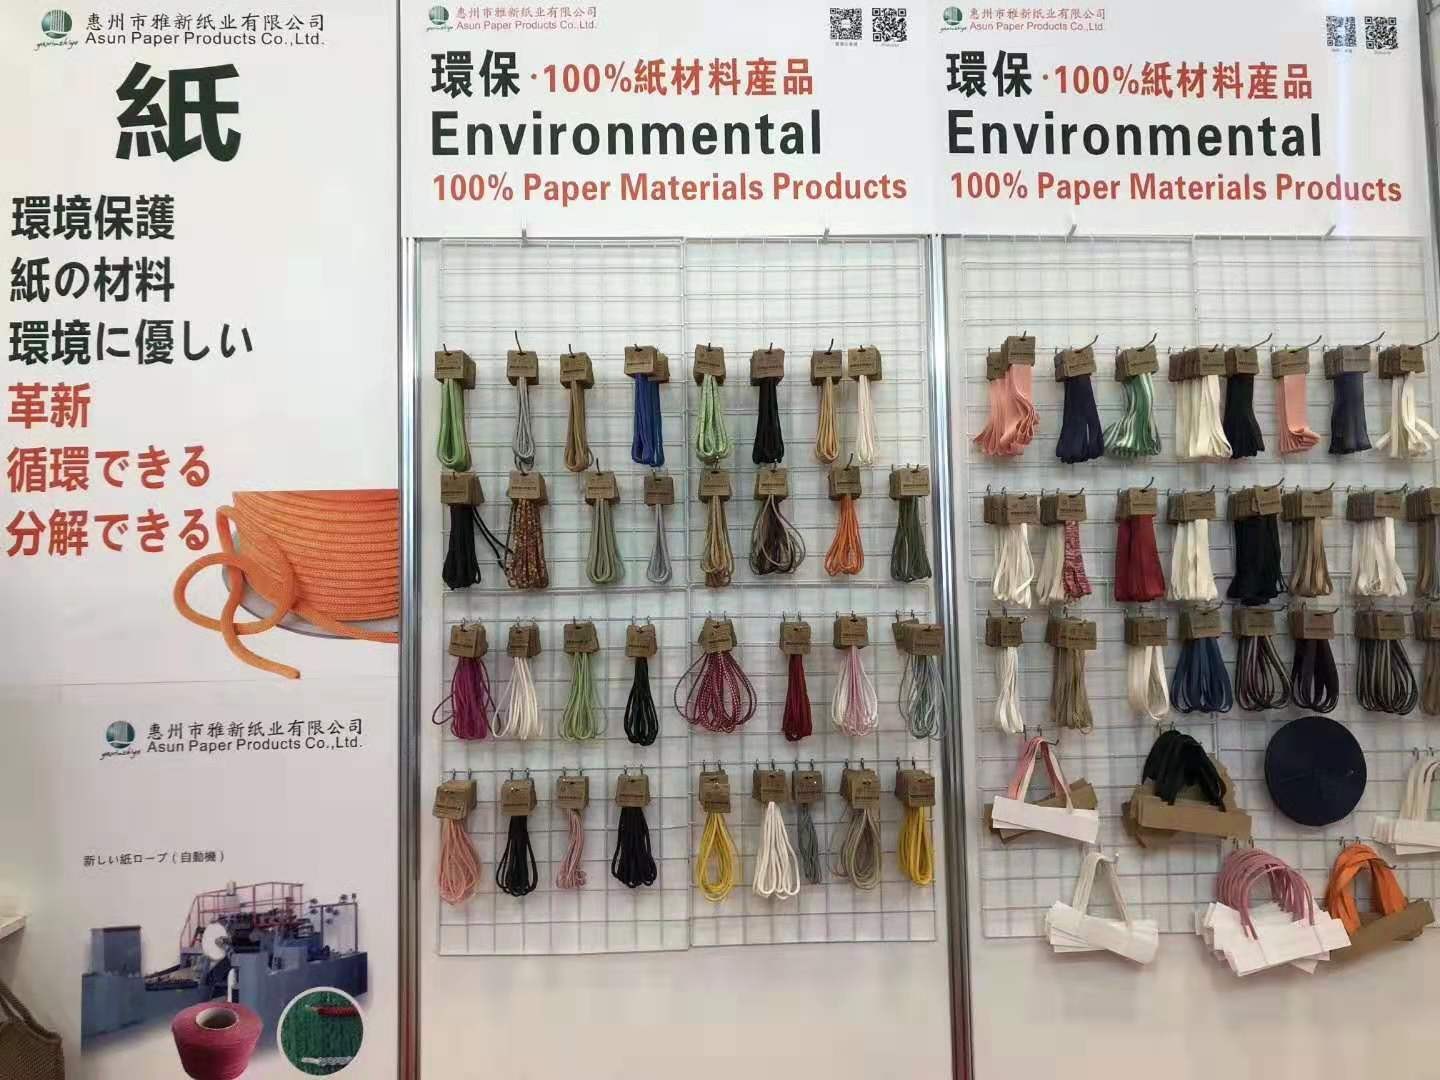 Japanpack2019, 29th.Oct to 1st.Nov, our booth number is 4I-14